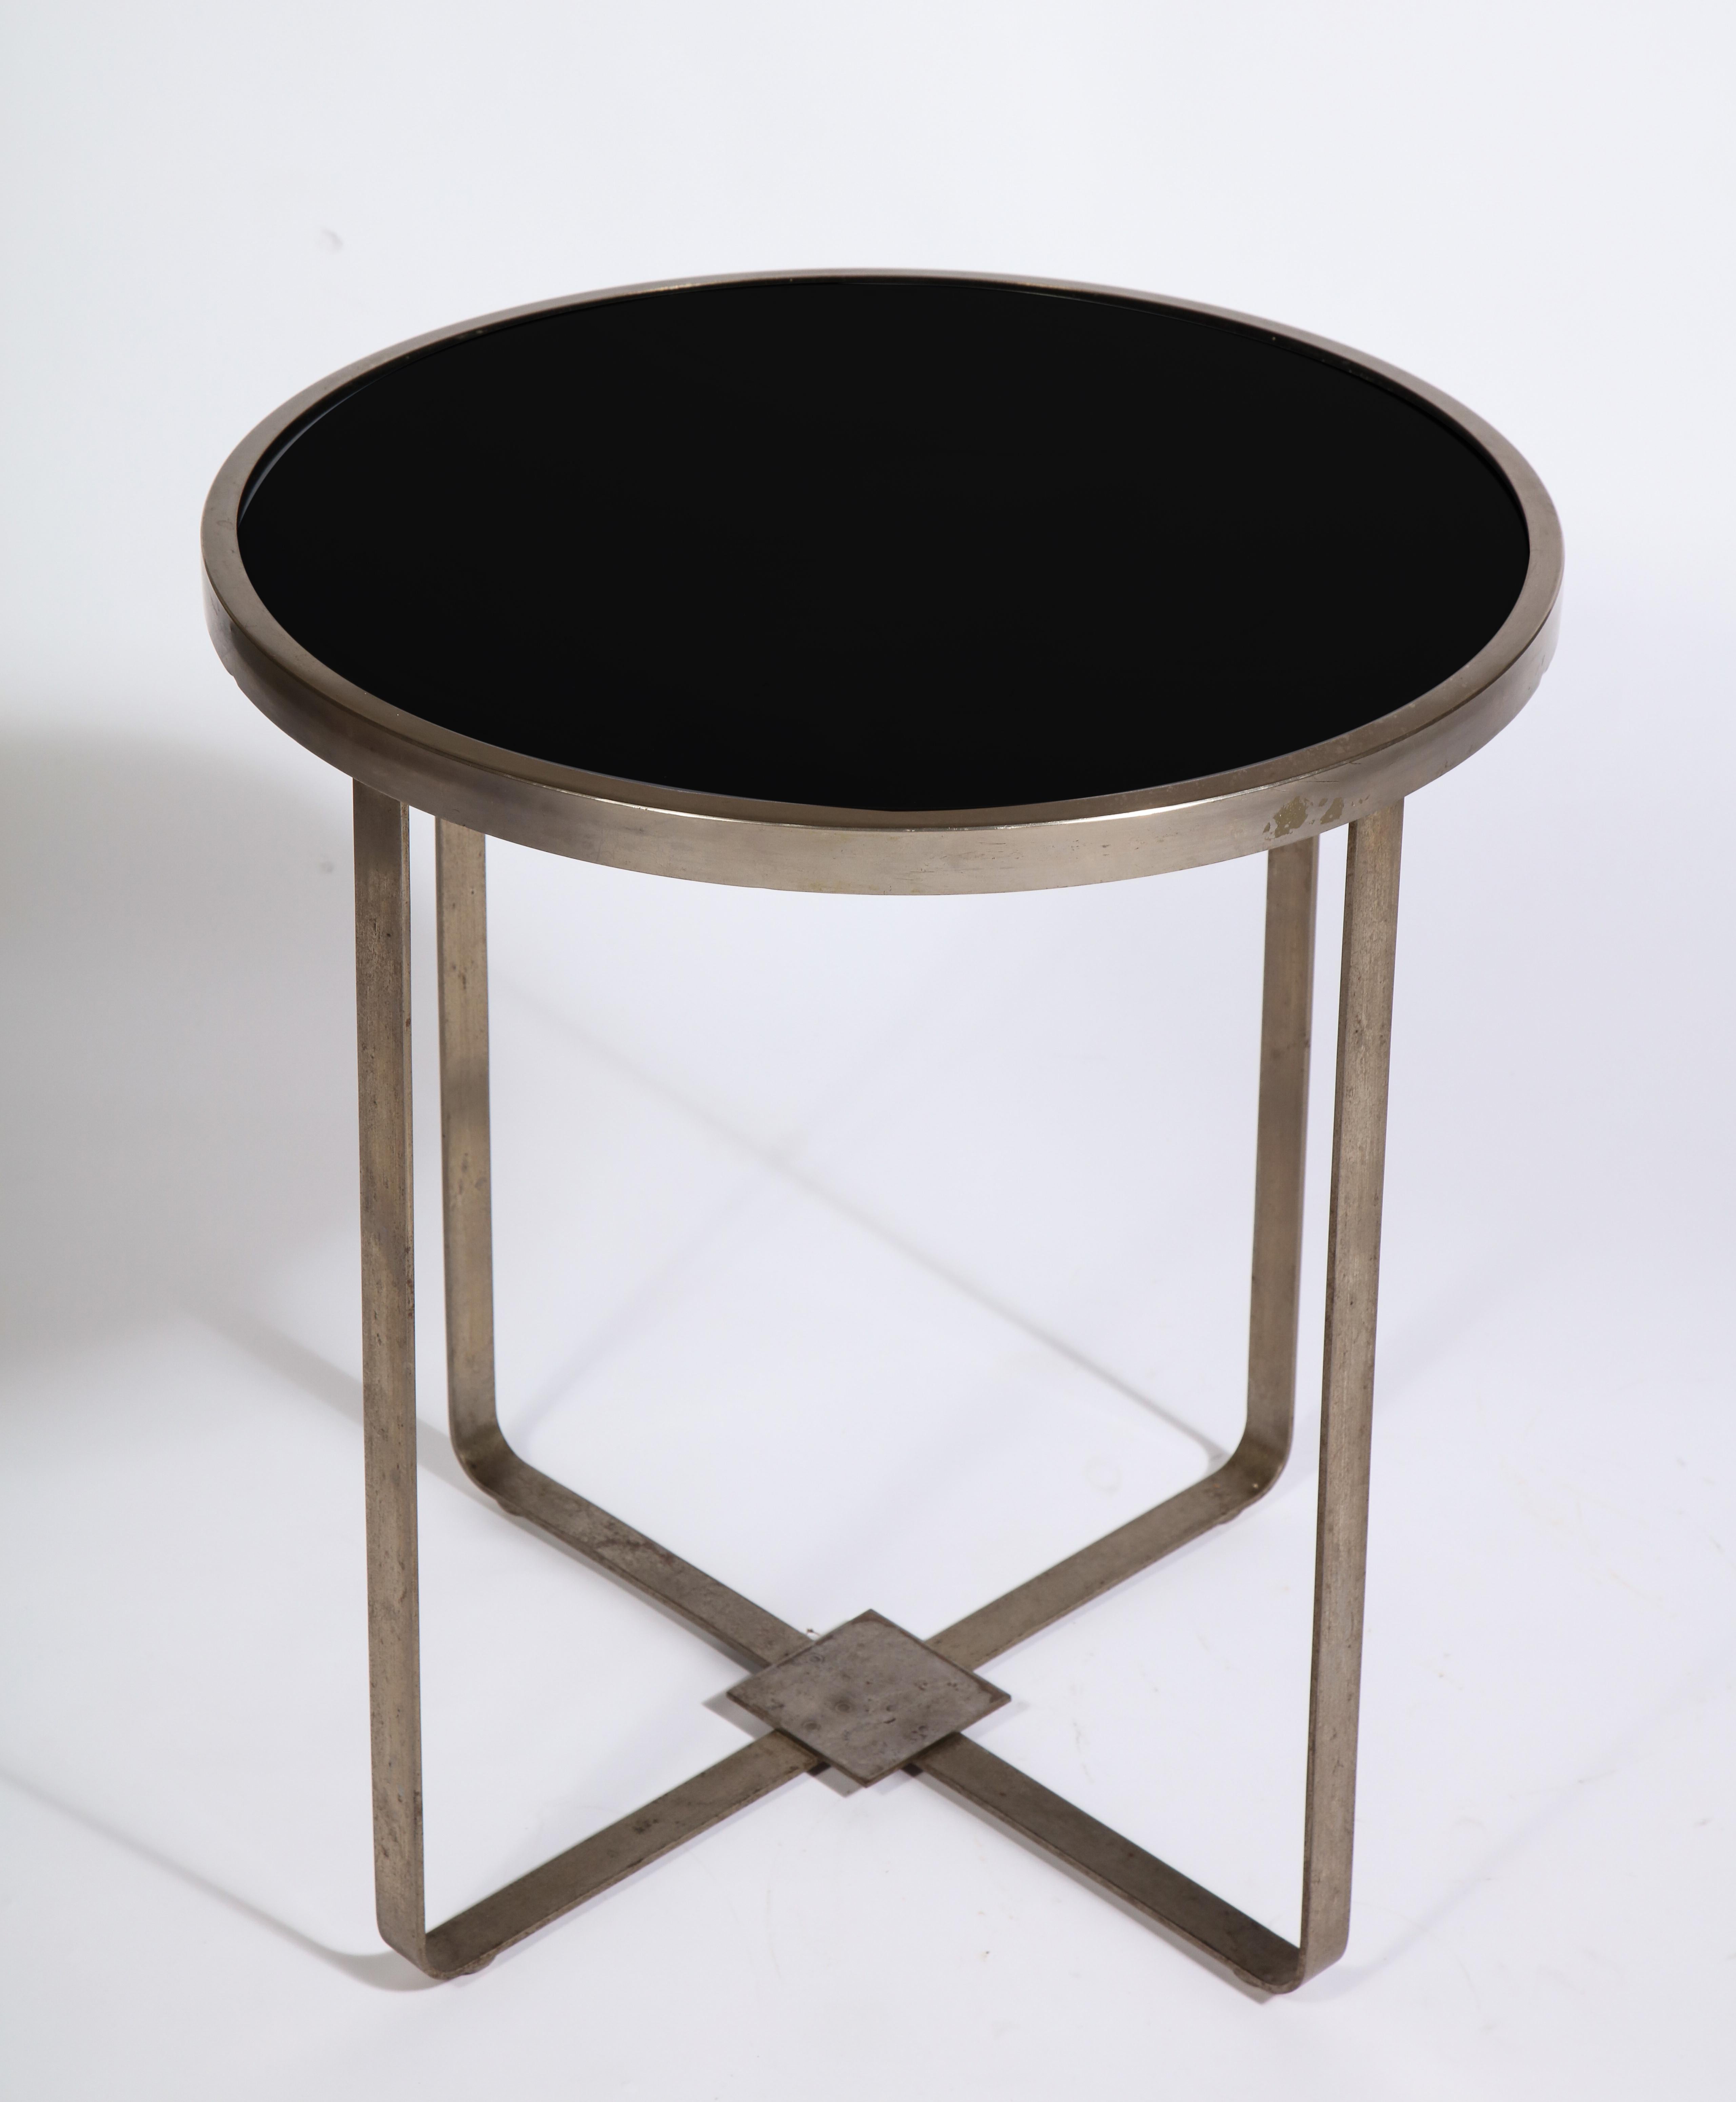 Modernist steel round black glass table, France, 1930s

Purchased with Jacques Adnet Chairs and attributed to him, but not documented.
Beautiful steel with black opaline glass. Chic and modern.